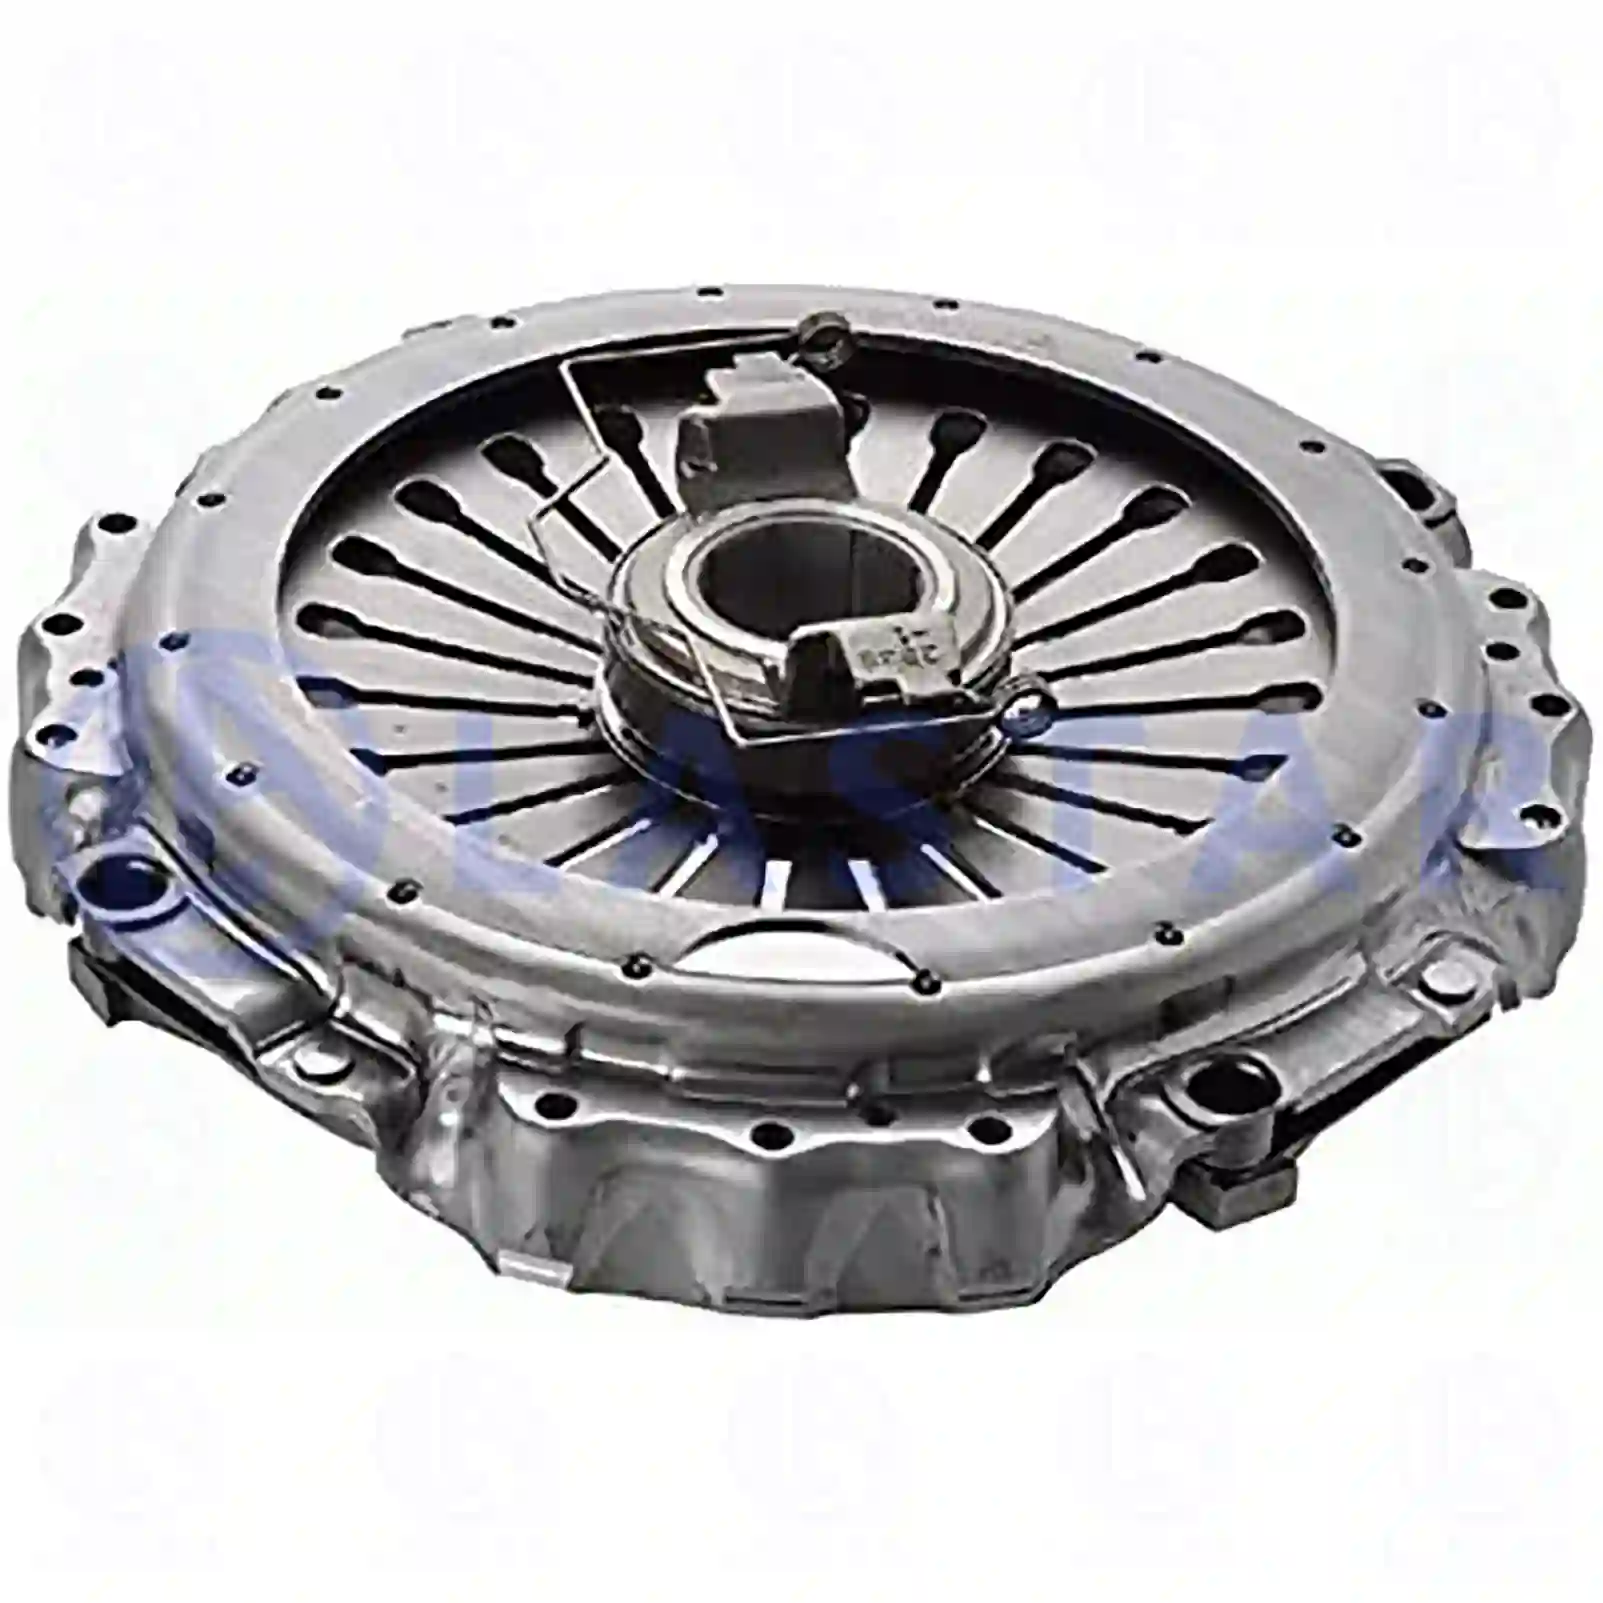 Clutch cover, with release bearing, 77722303, 85000266, 20569134, 85000266, 0074207022, 7420707022, 20569134, 3192782, 8113894, 8119894, 85000529 ||  77722303 Lastar Spare Part | Truck Spare Parts, Auotomotive Spare Parts Clutch cover, with release bearing, 77722303, 85000266, 20569134, 85000266, 0074207022, 7420707022, 20569134, 3192782, 8113894, 8119894, 85000529 ||  77722303 Lastar Spare Part | Truck Spare Parts, Auotomotive Spare Parts